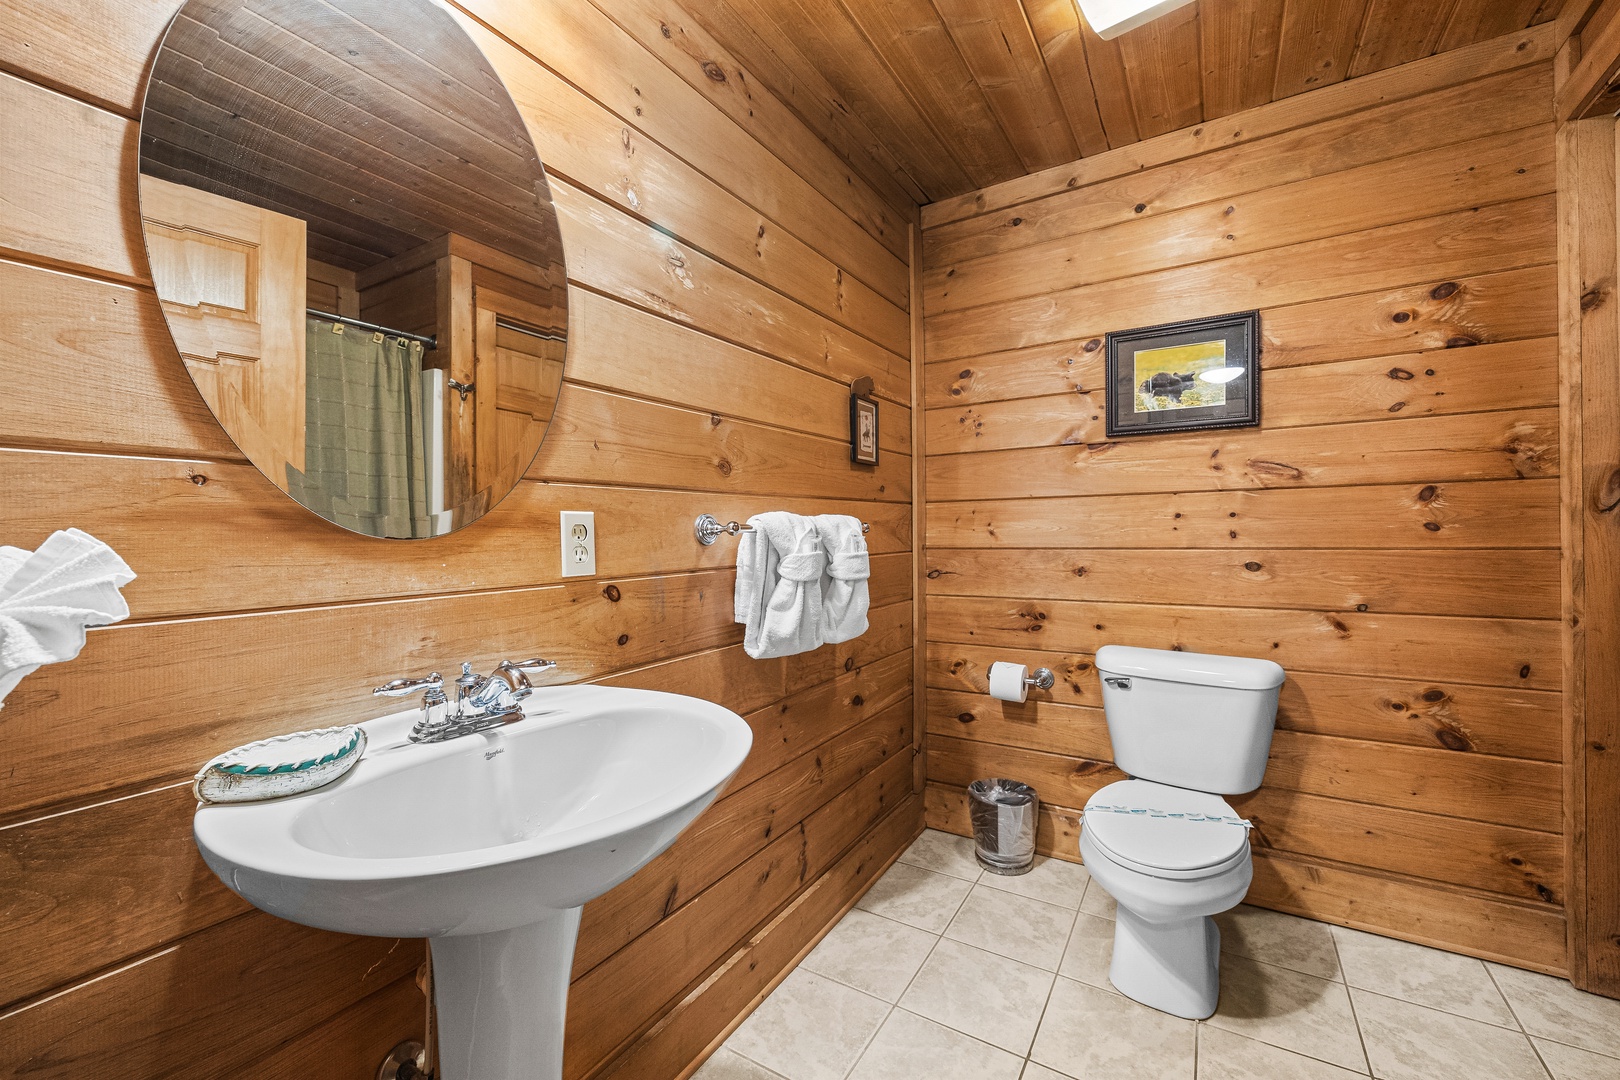 Bathroom with a pedestal sink at A Beary Nice Cabin, a 2 bedroom cabin rental located in Pigeon Forge